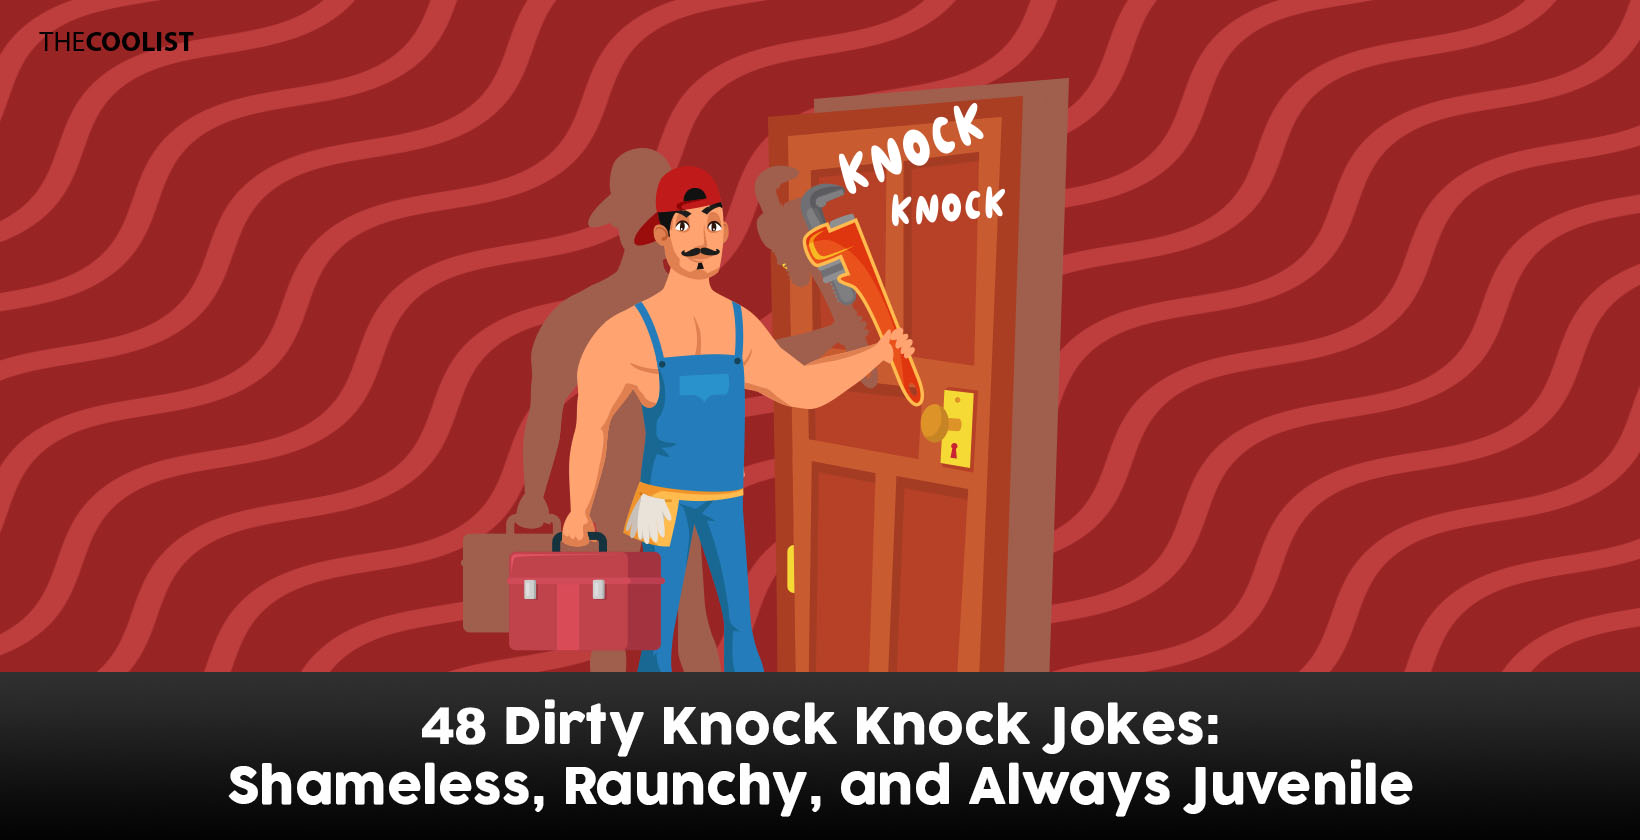 Knock Knock Dirty Joke 48 Dirty Knock-Knock Jokes (Shameless, Raunchy, and Always Juvenile)